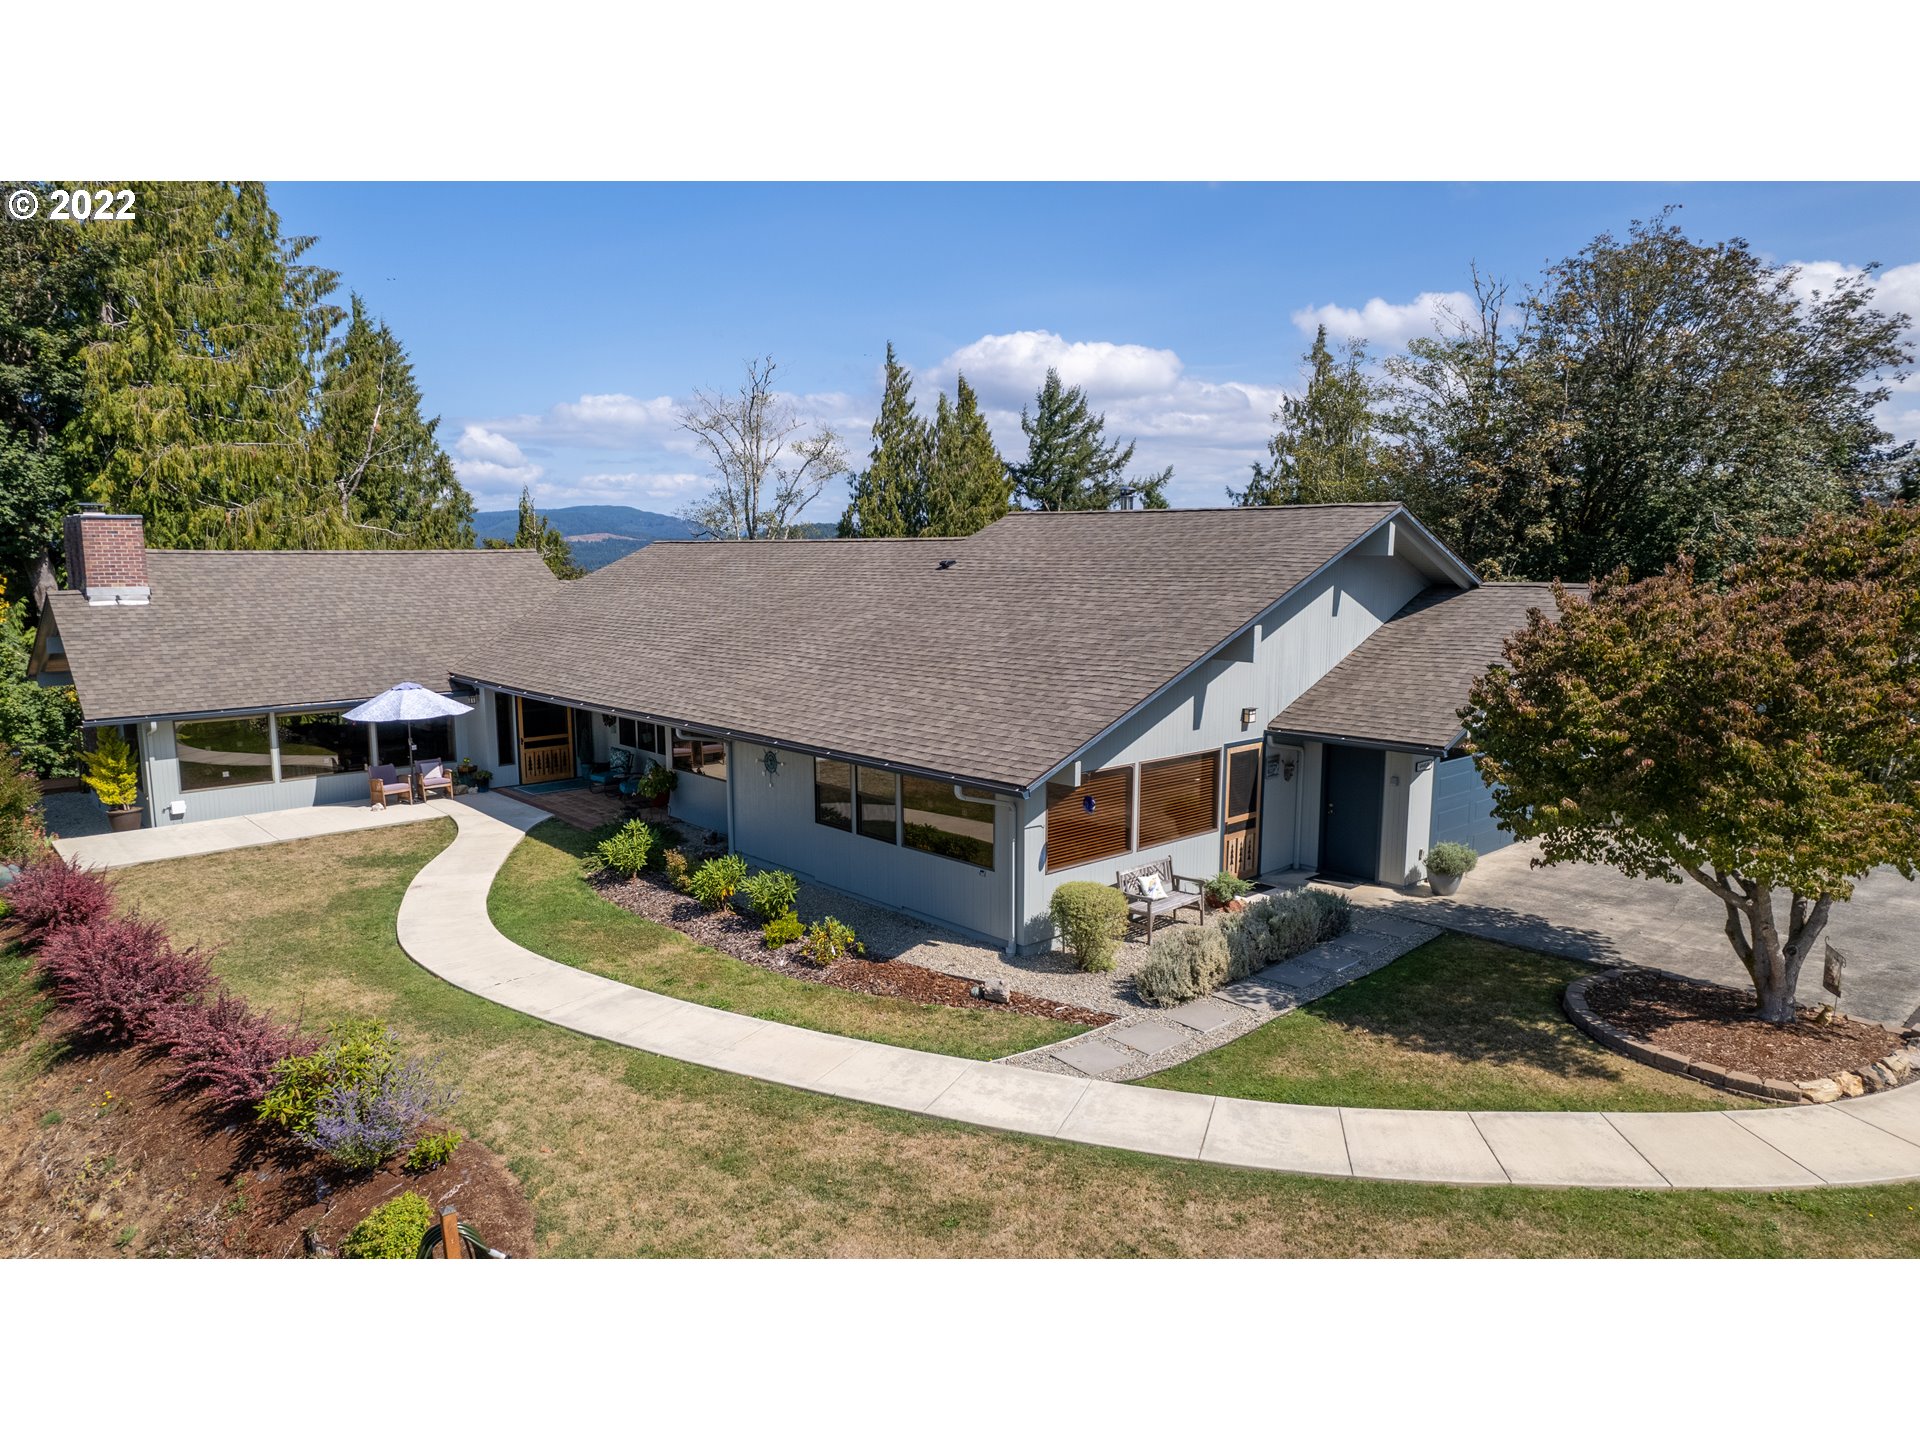 1333 E 15TH ST, Coquille, OR 97423